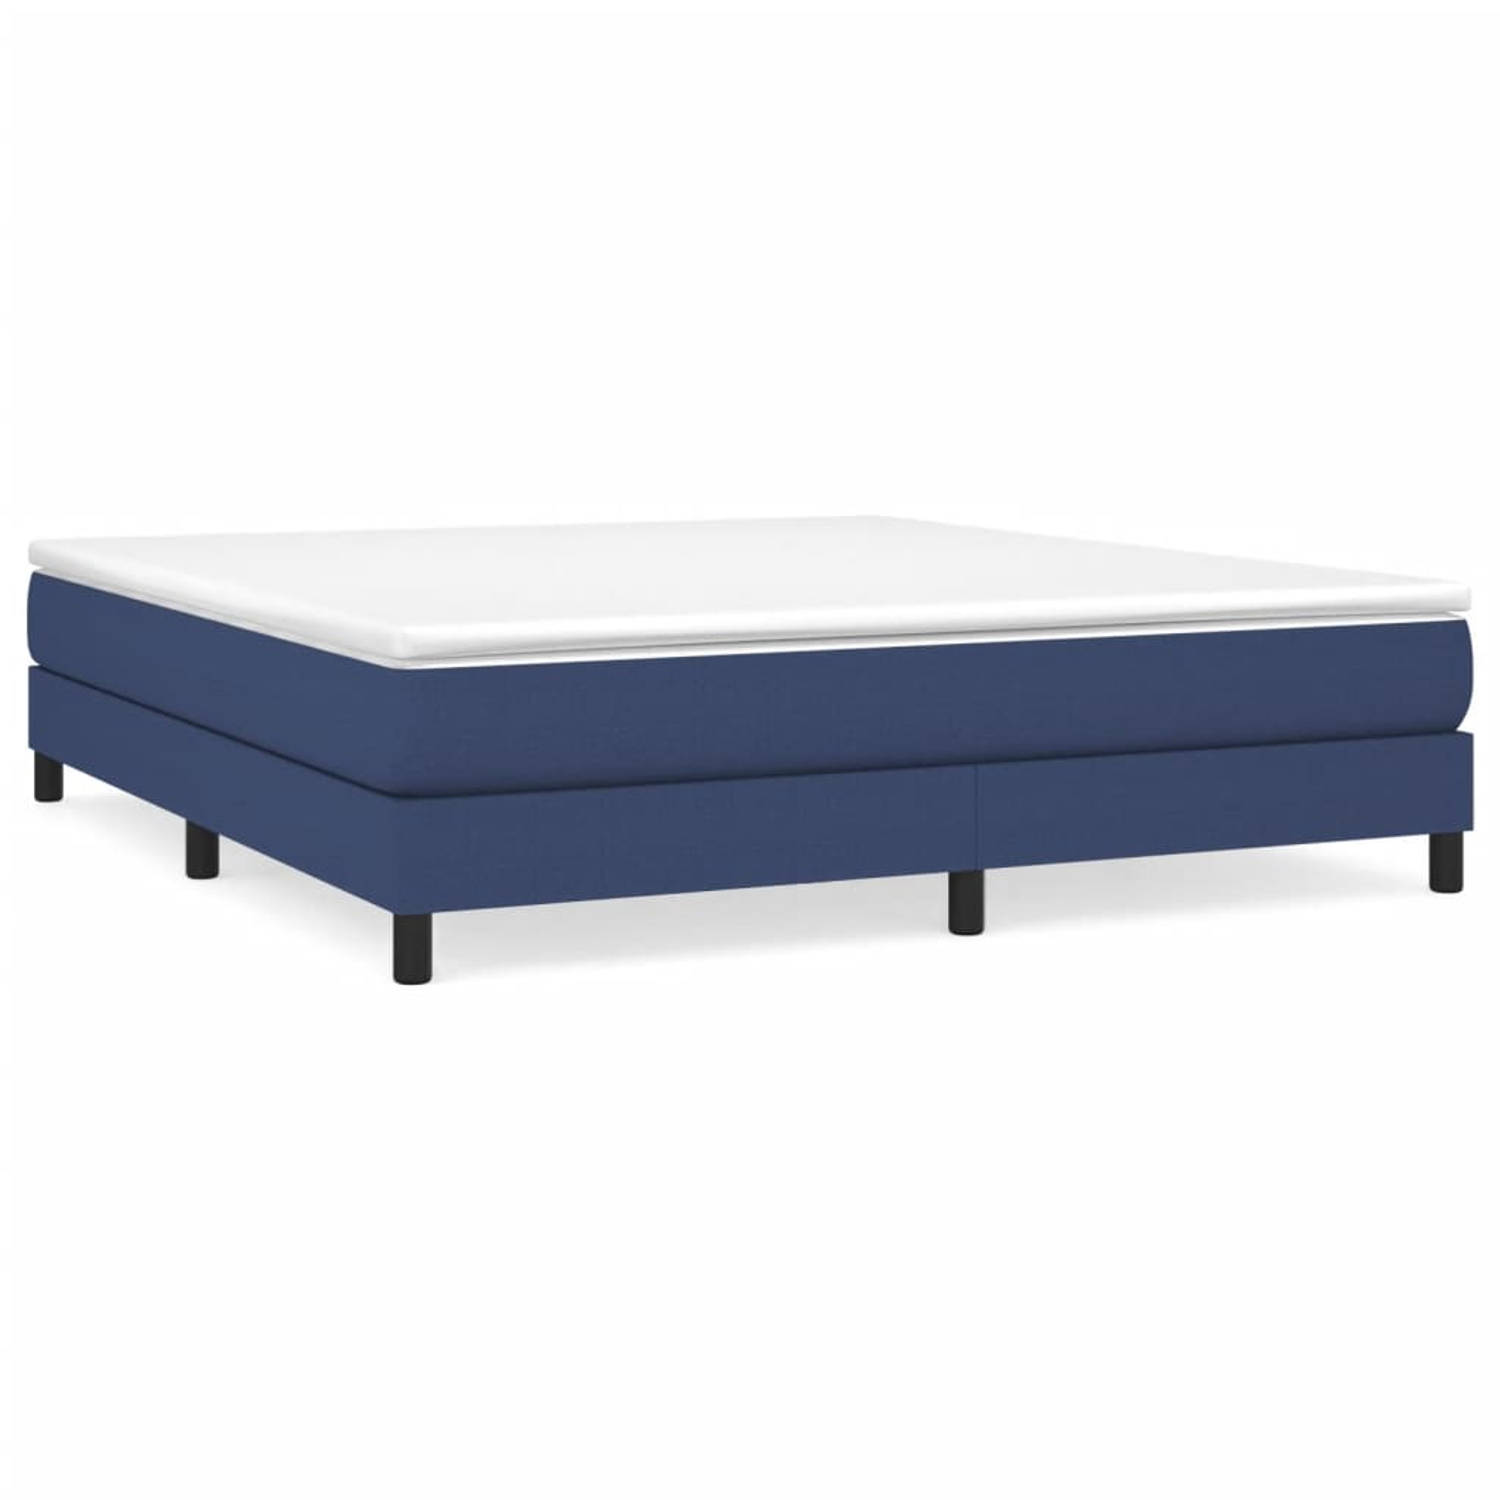 The Living Store Boxspringframe stof blauw 180x200 cm - Boxspringframe - Boxspringframes - Bed - Ledikant - Slaapmeubel - Bedframe - Bedbodem - Tweepersoonsbed - Boxspring - Bedden